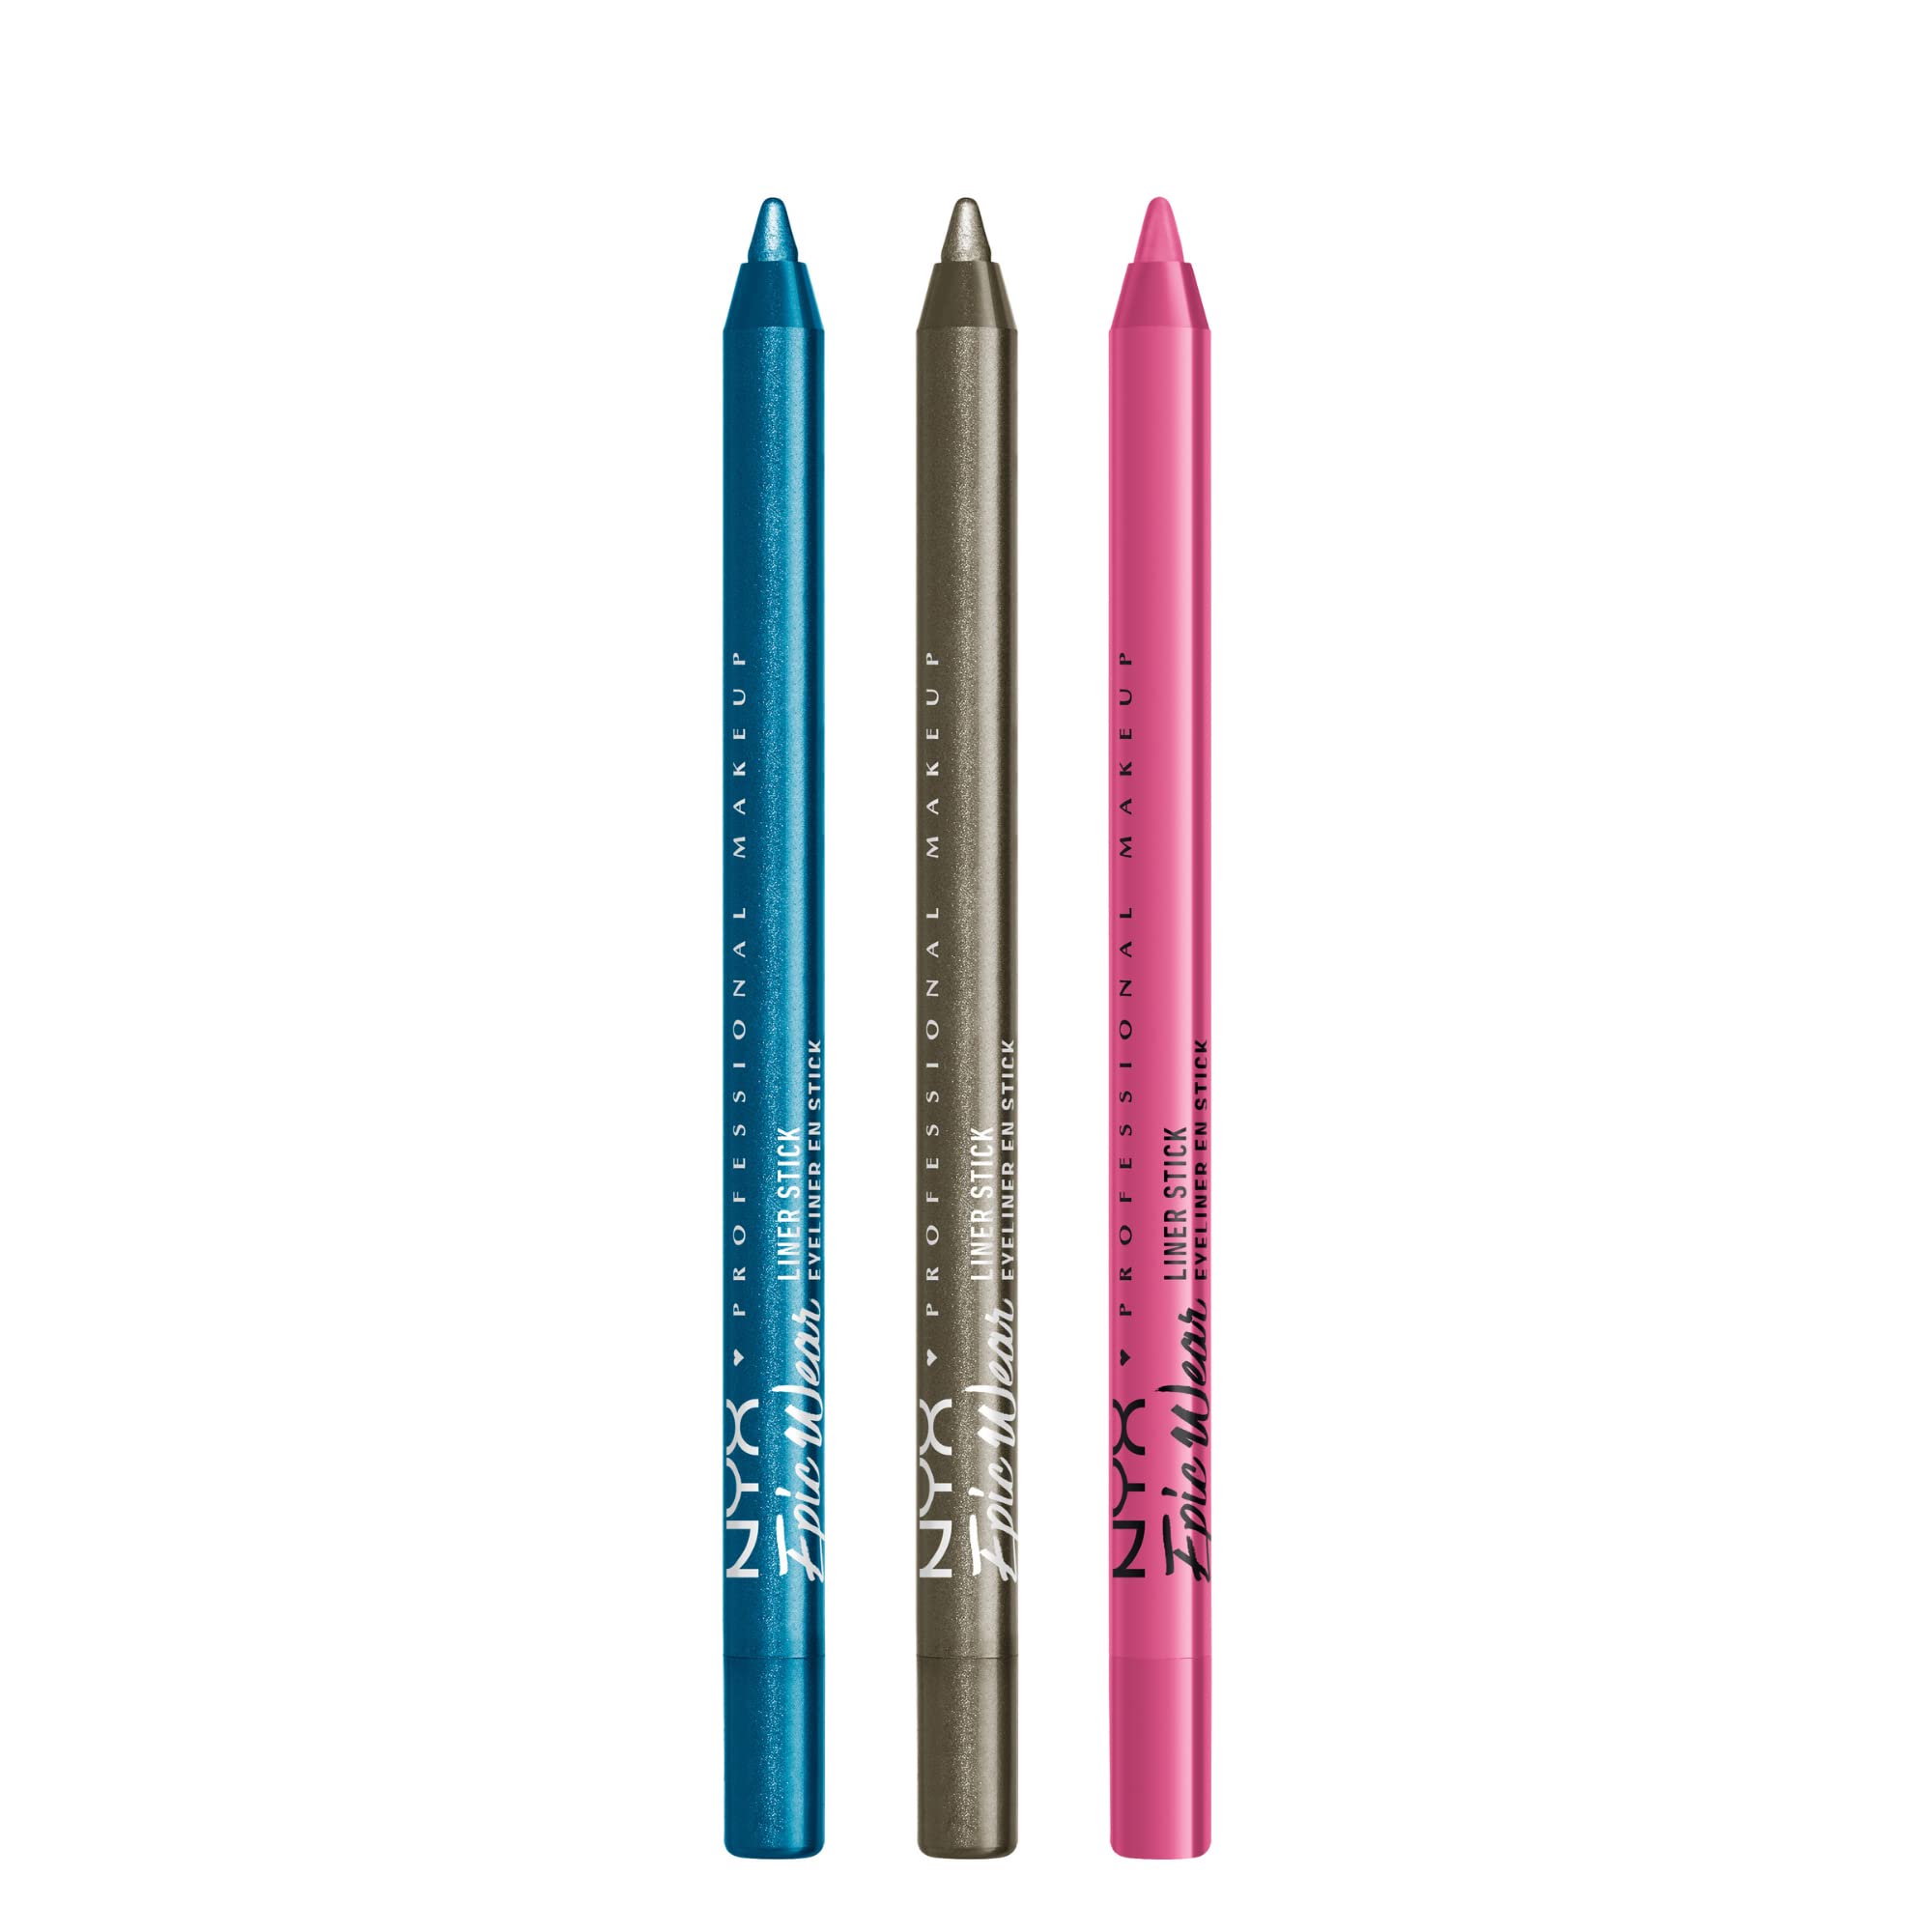 Eyeliner Pencil Stick Wear Pack (Turquoise Storm 3 Epic MAKEUP NYX PROFESSIONAL - Liner Long-Lasting of